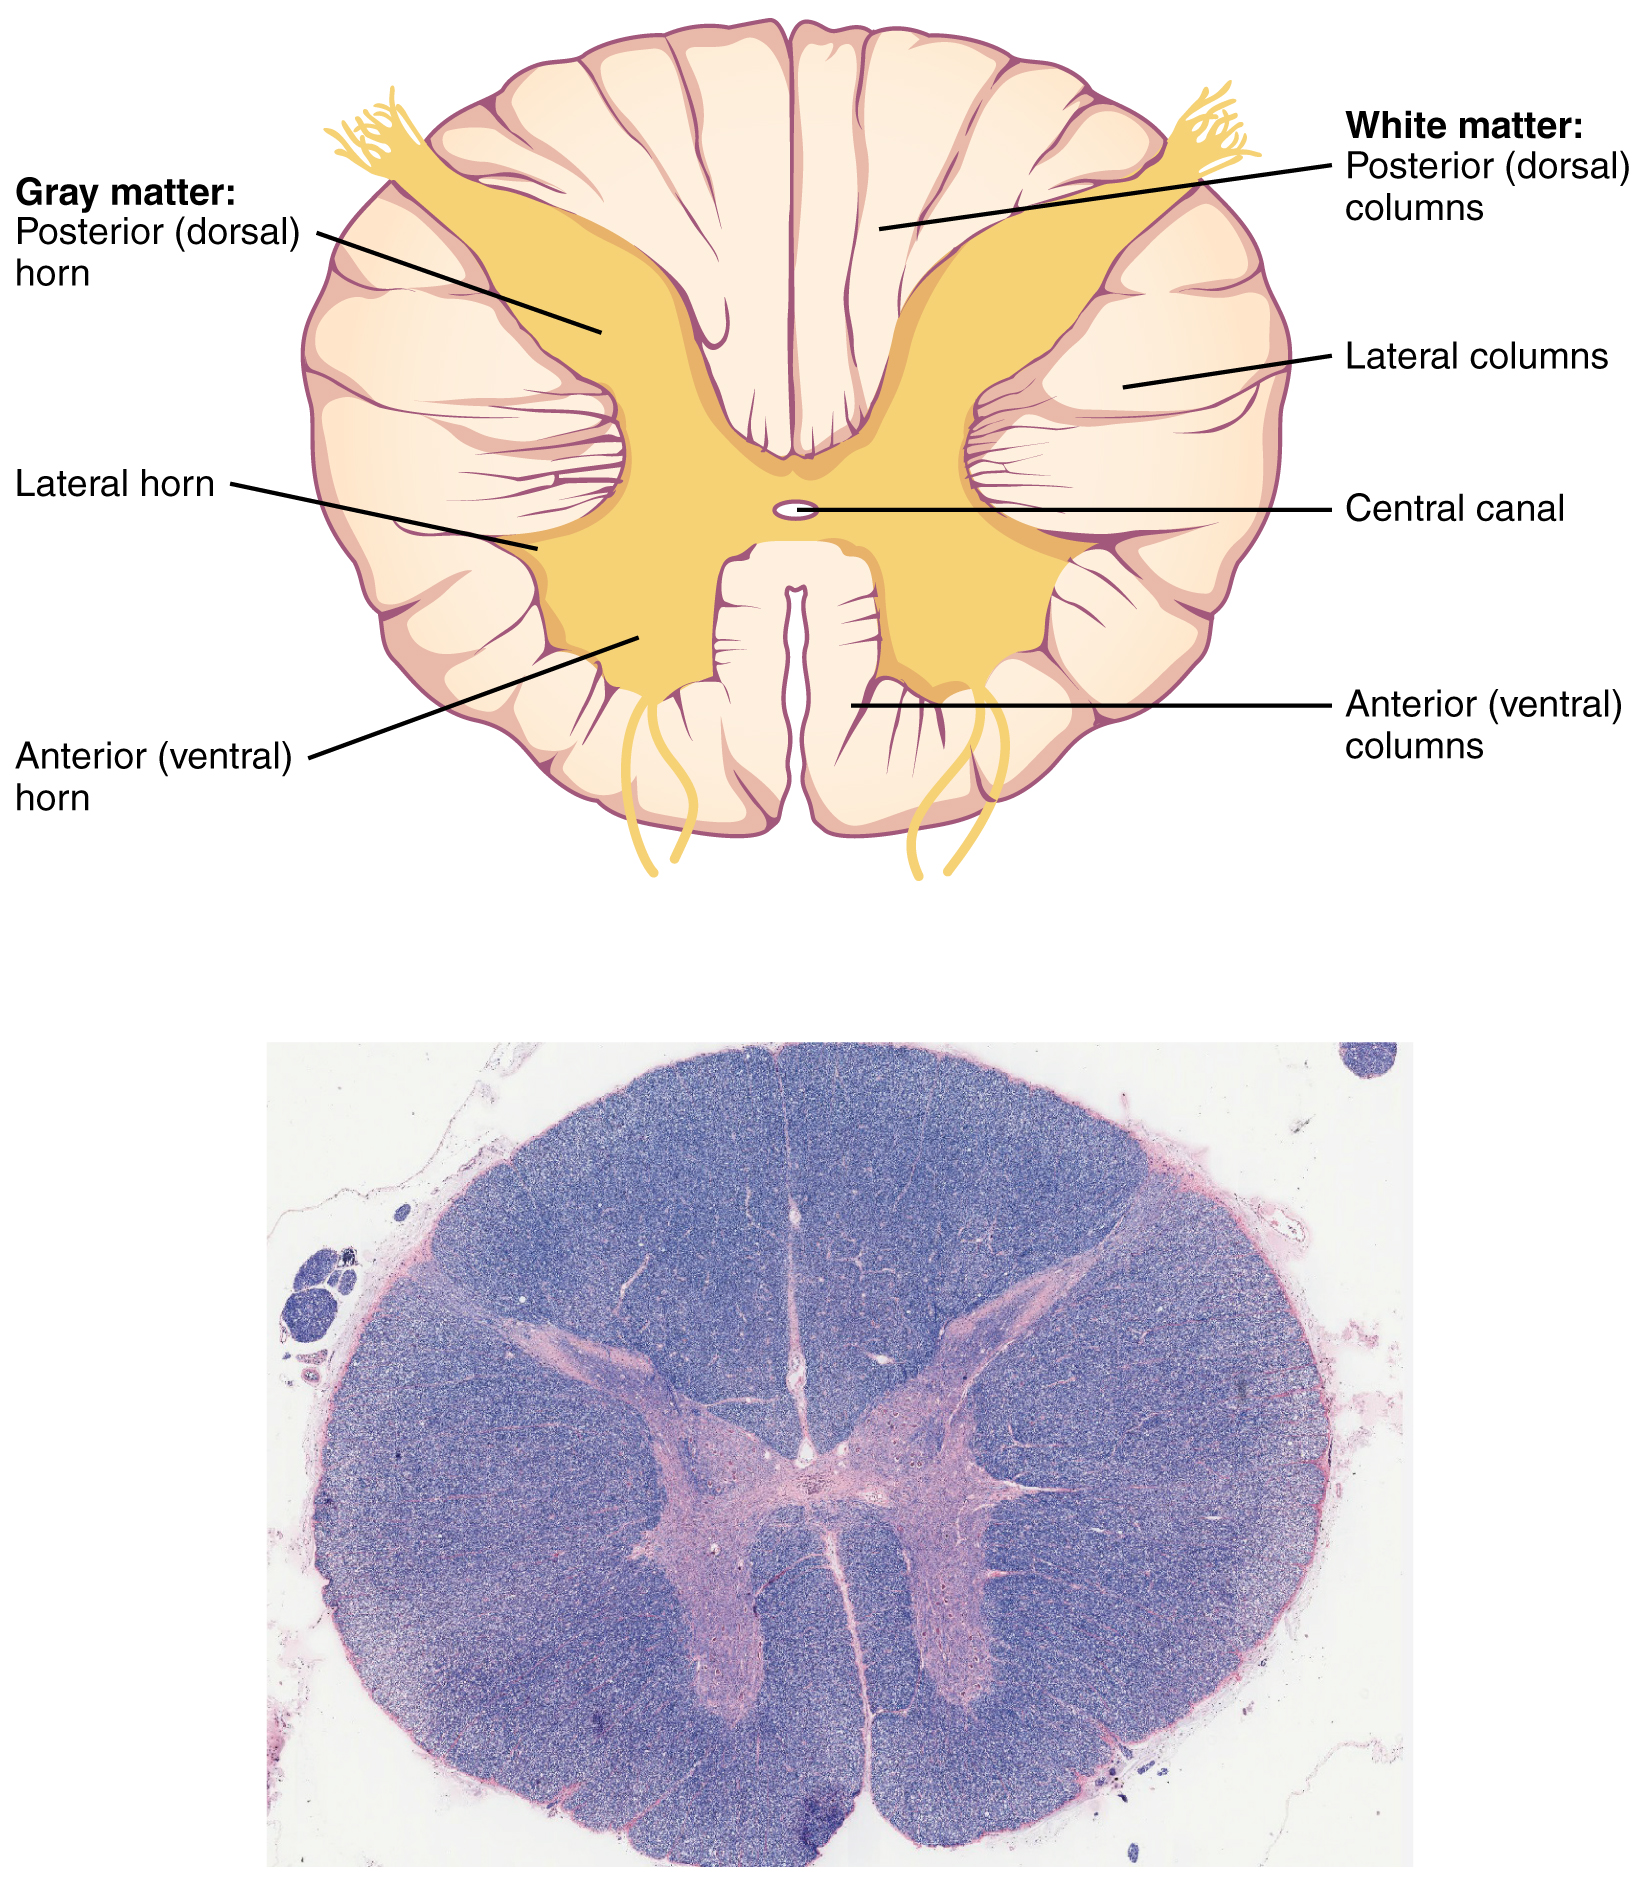 Schematic representation of gray matter & white matter in the spinal cord AND a micrograph of spinal cord cross section